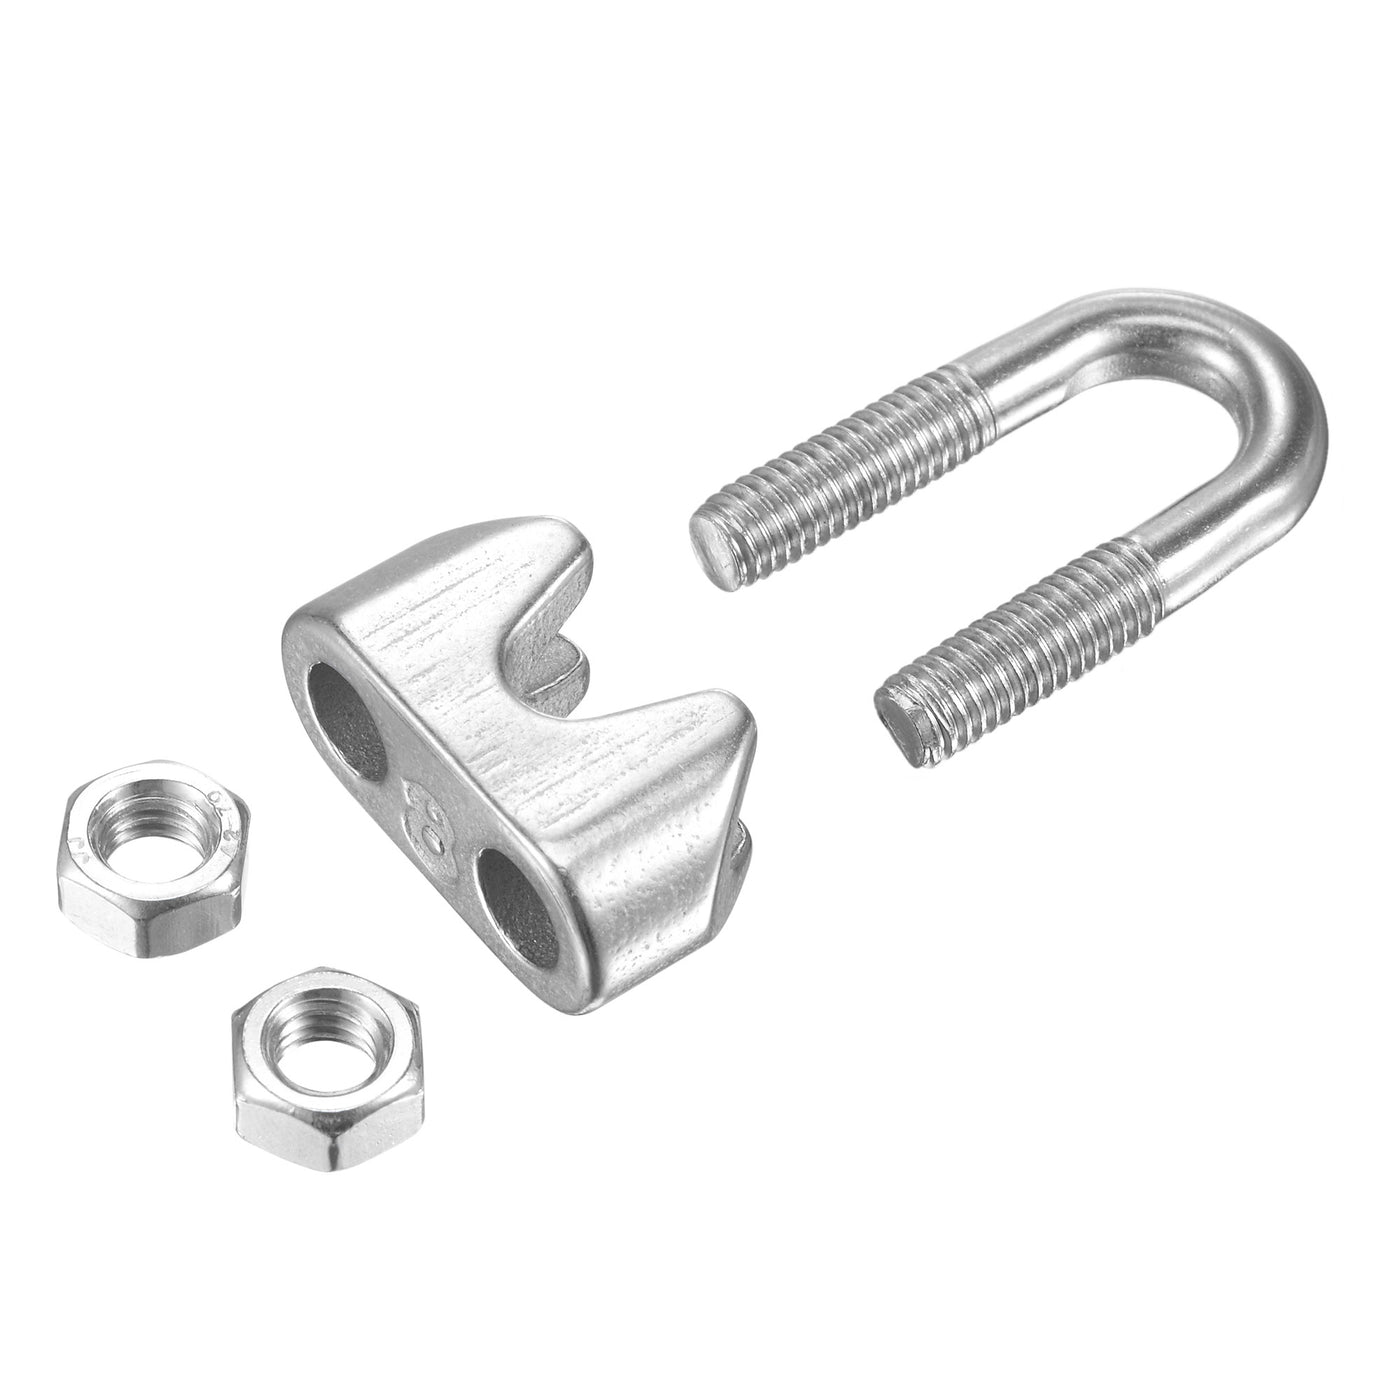 uxcell Uxcell Wire Rope Cable Clip Kit for M8, Included Rope Clamp 10Pcs and Thimble Rigging 10Pcs, 304 Stainless Steel U Bolt Saddle Fastener